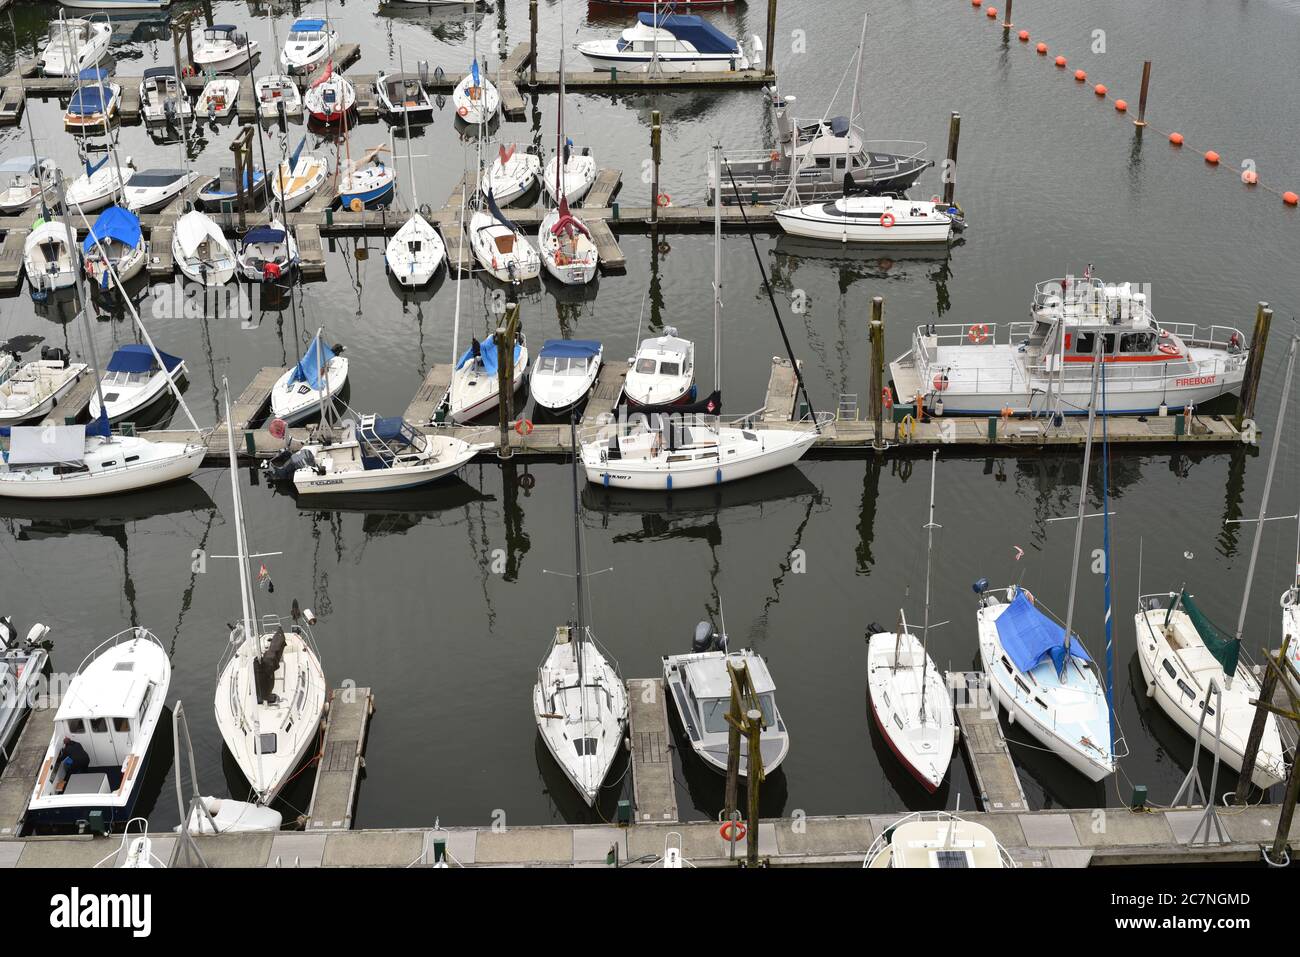 Various sailing and power boats are moored at a marina dock below the Burrard Street Bridge in Vancouver, British Columbia, Canada Stock Photo